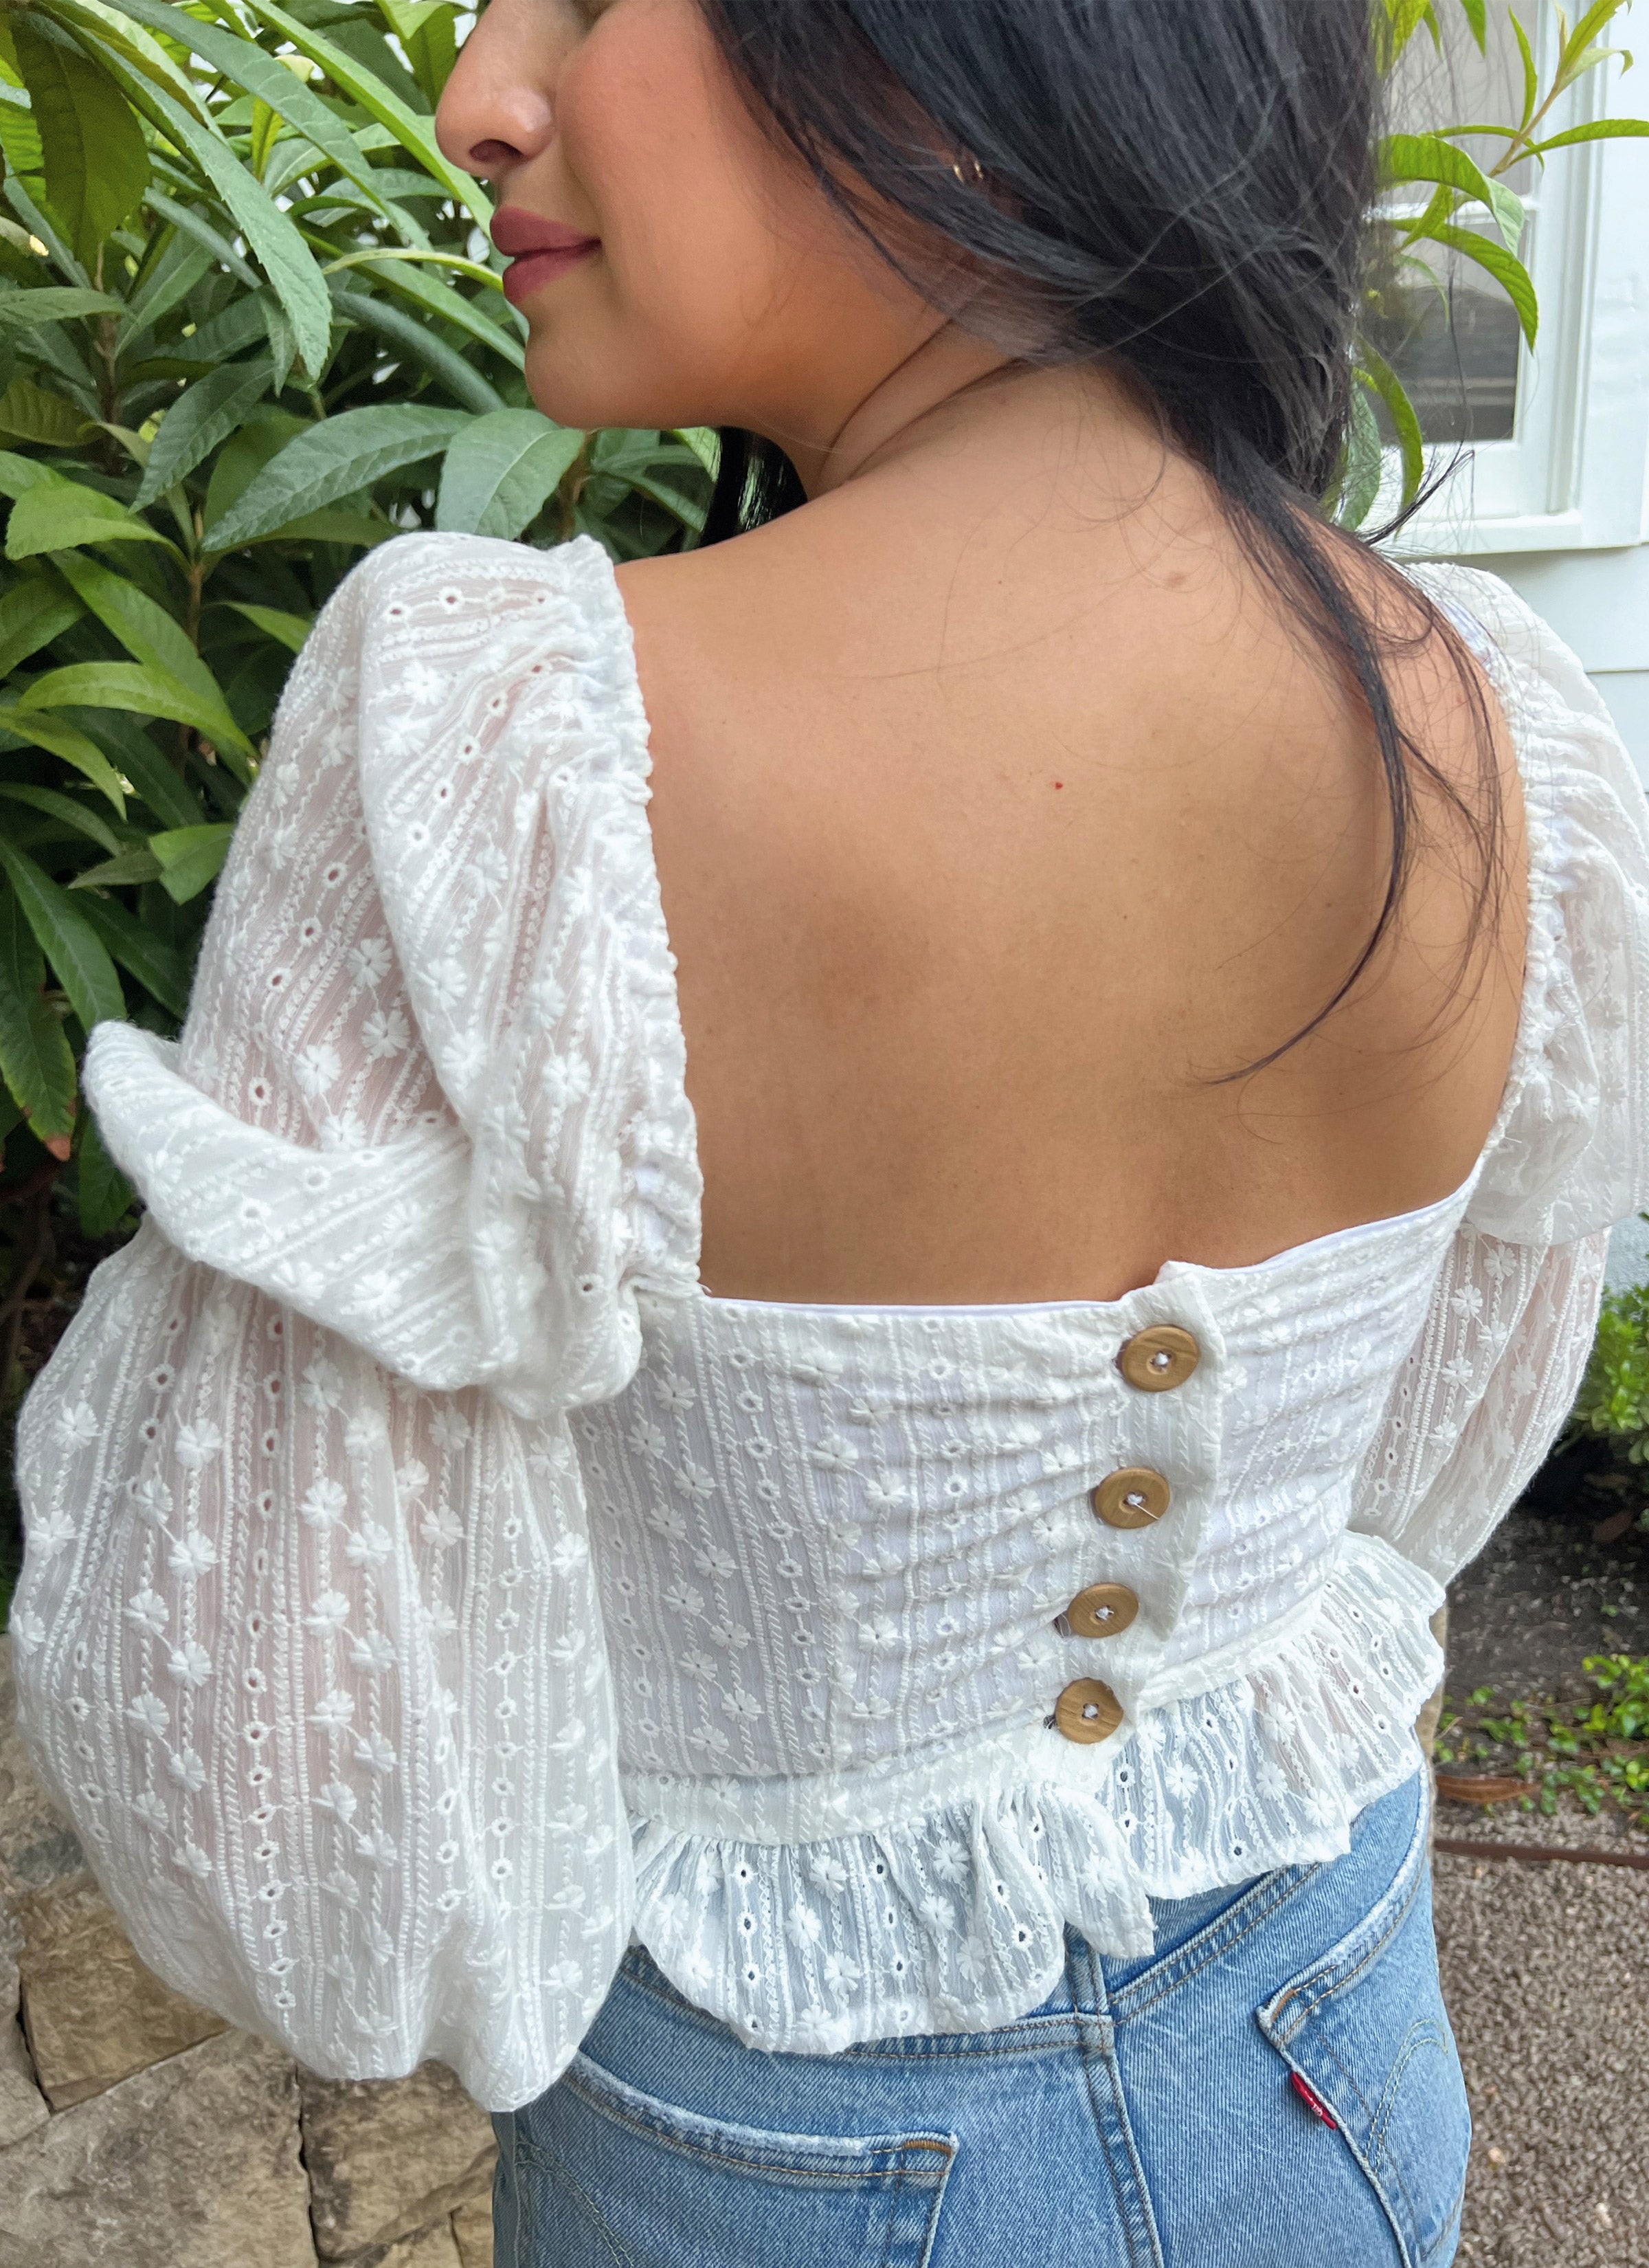 Know Me pattern 2019 Misses' Tops by Alissah Threads from Jaycotts Sewing Supplies